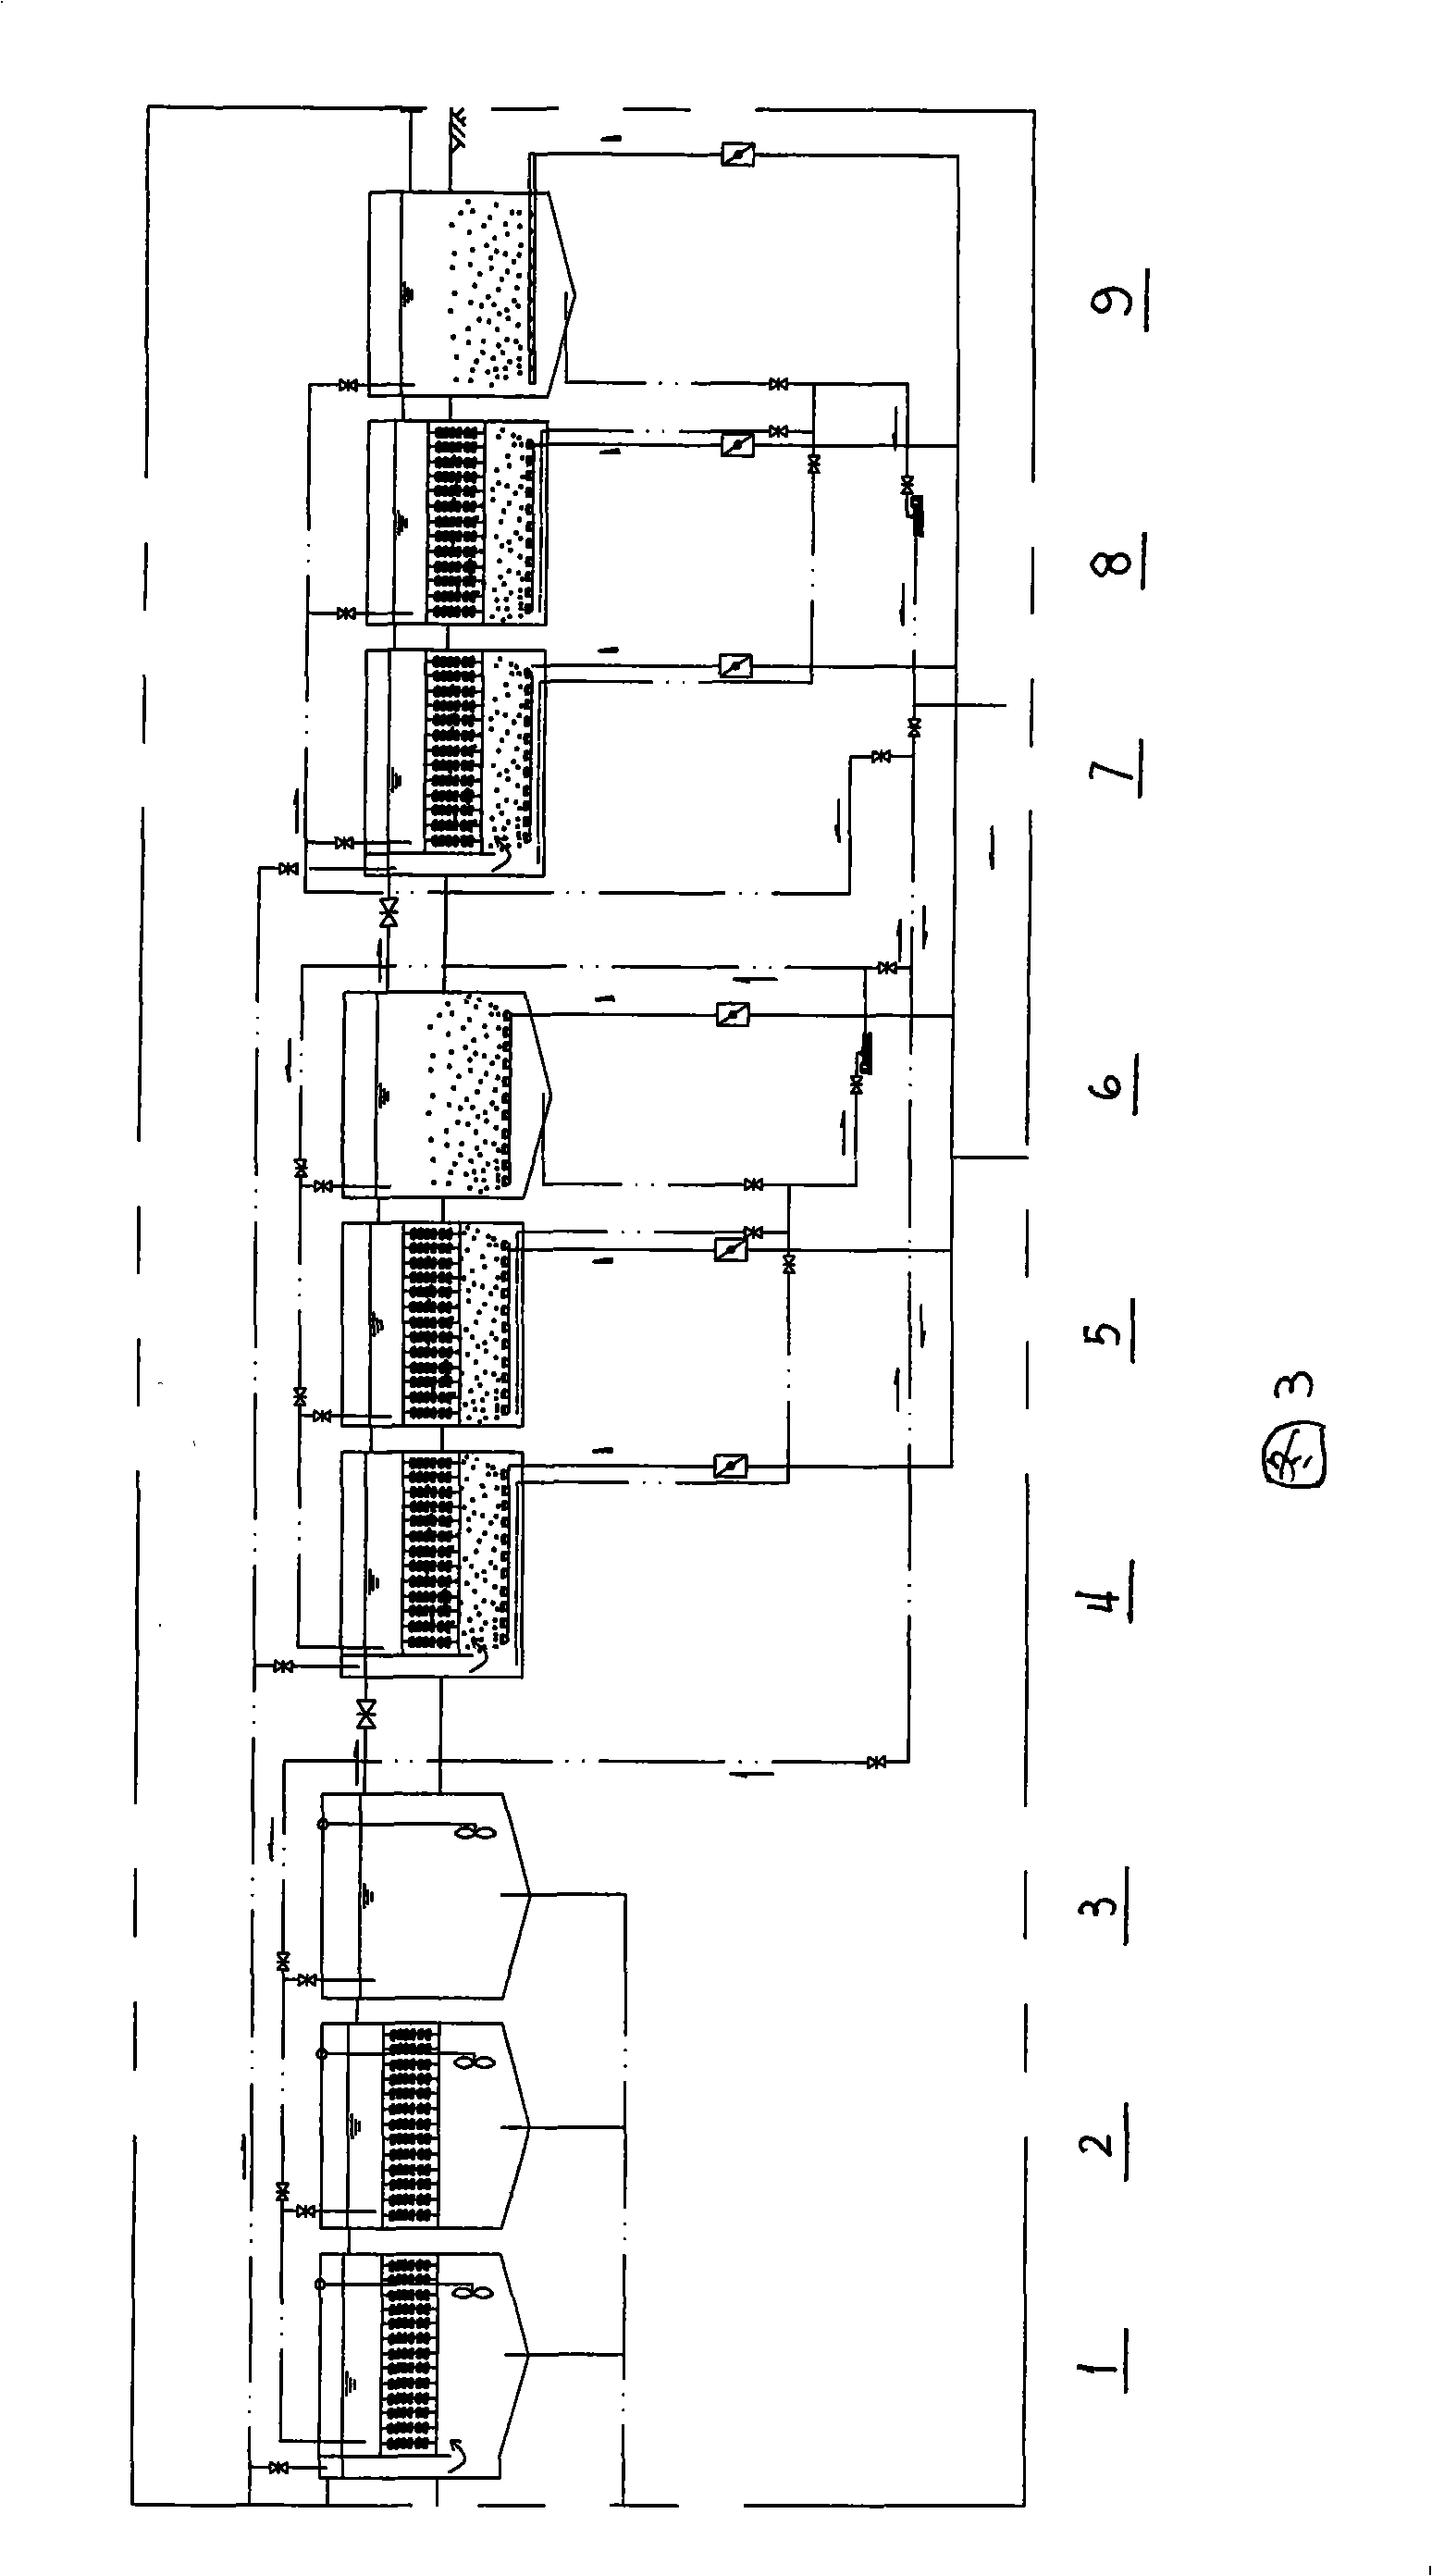 Multi-stage refluxing load control biological process and matched facilities